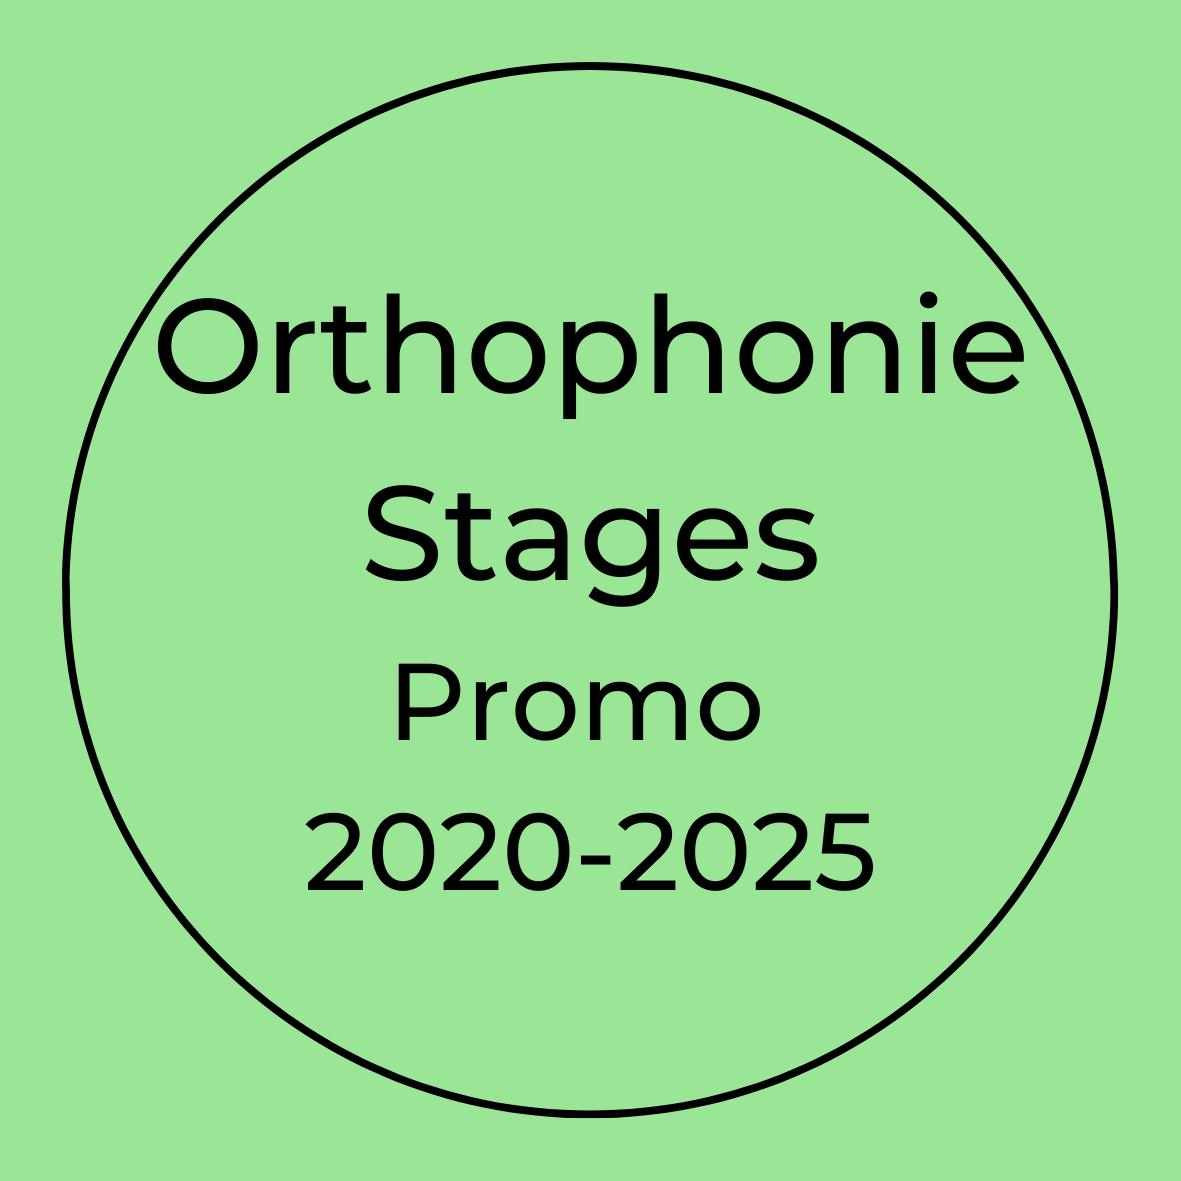 Orthophonie Stages Promo 2020-2025